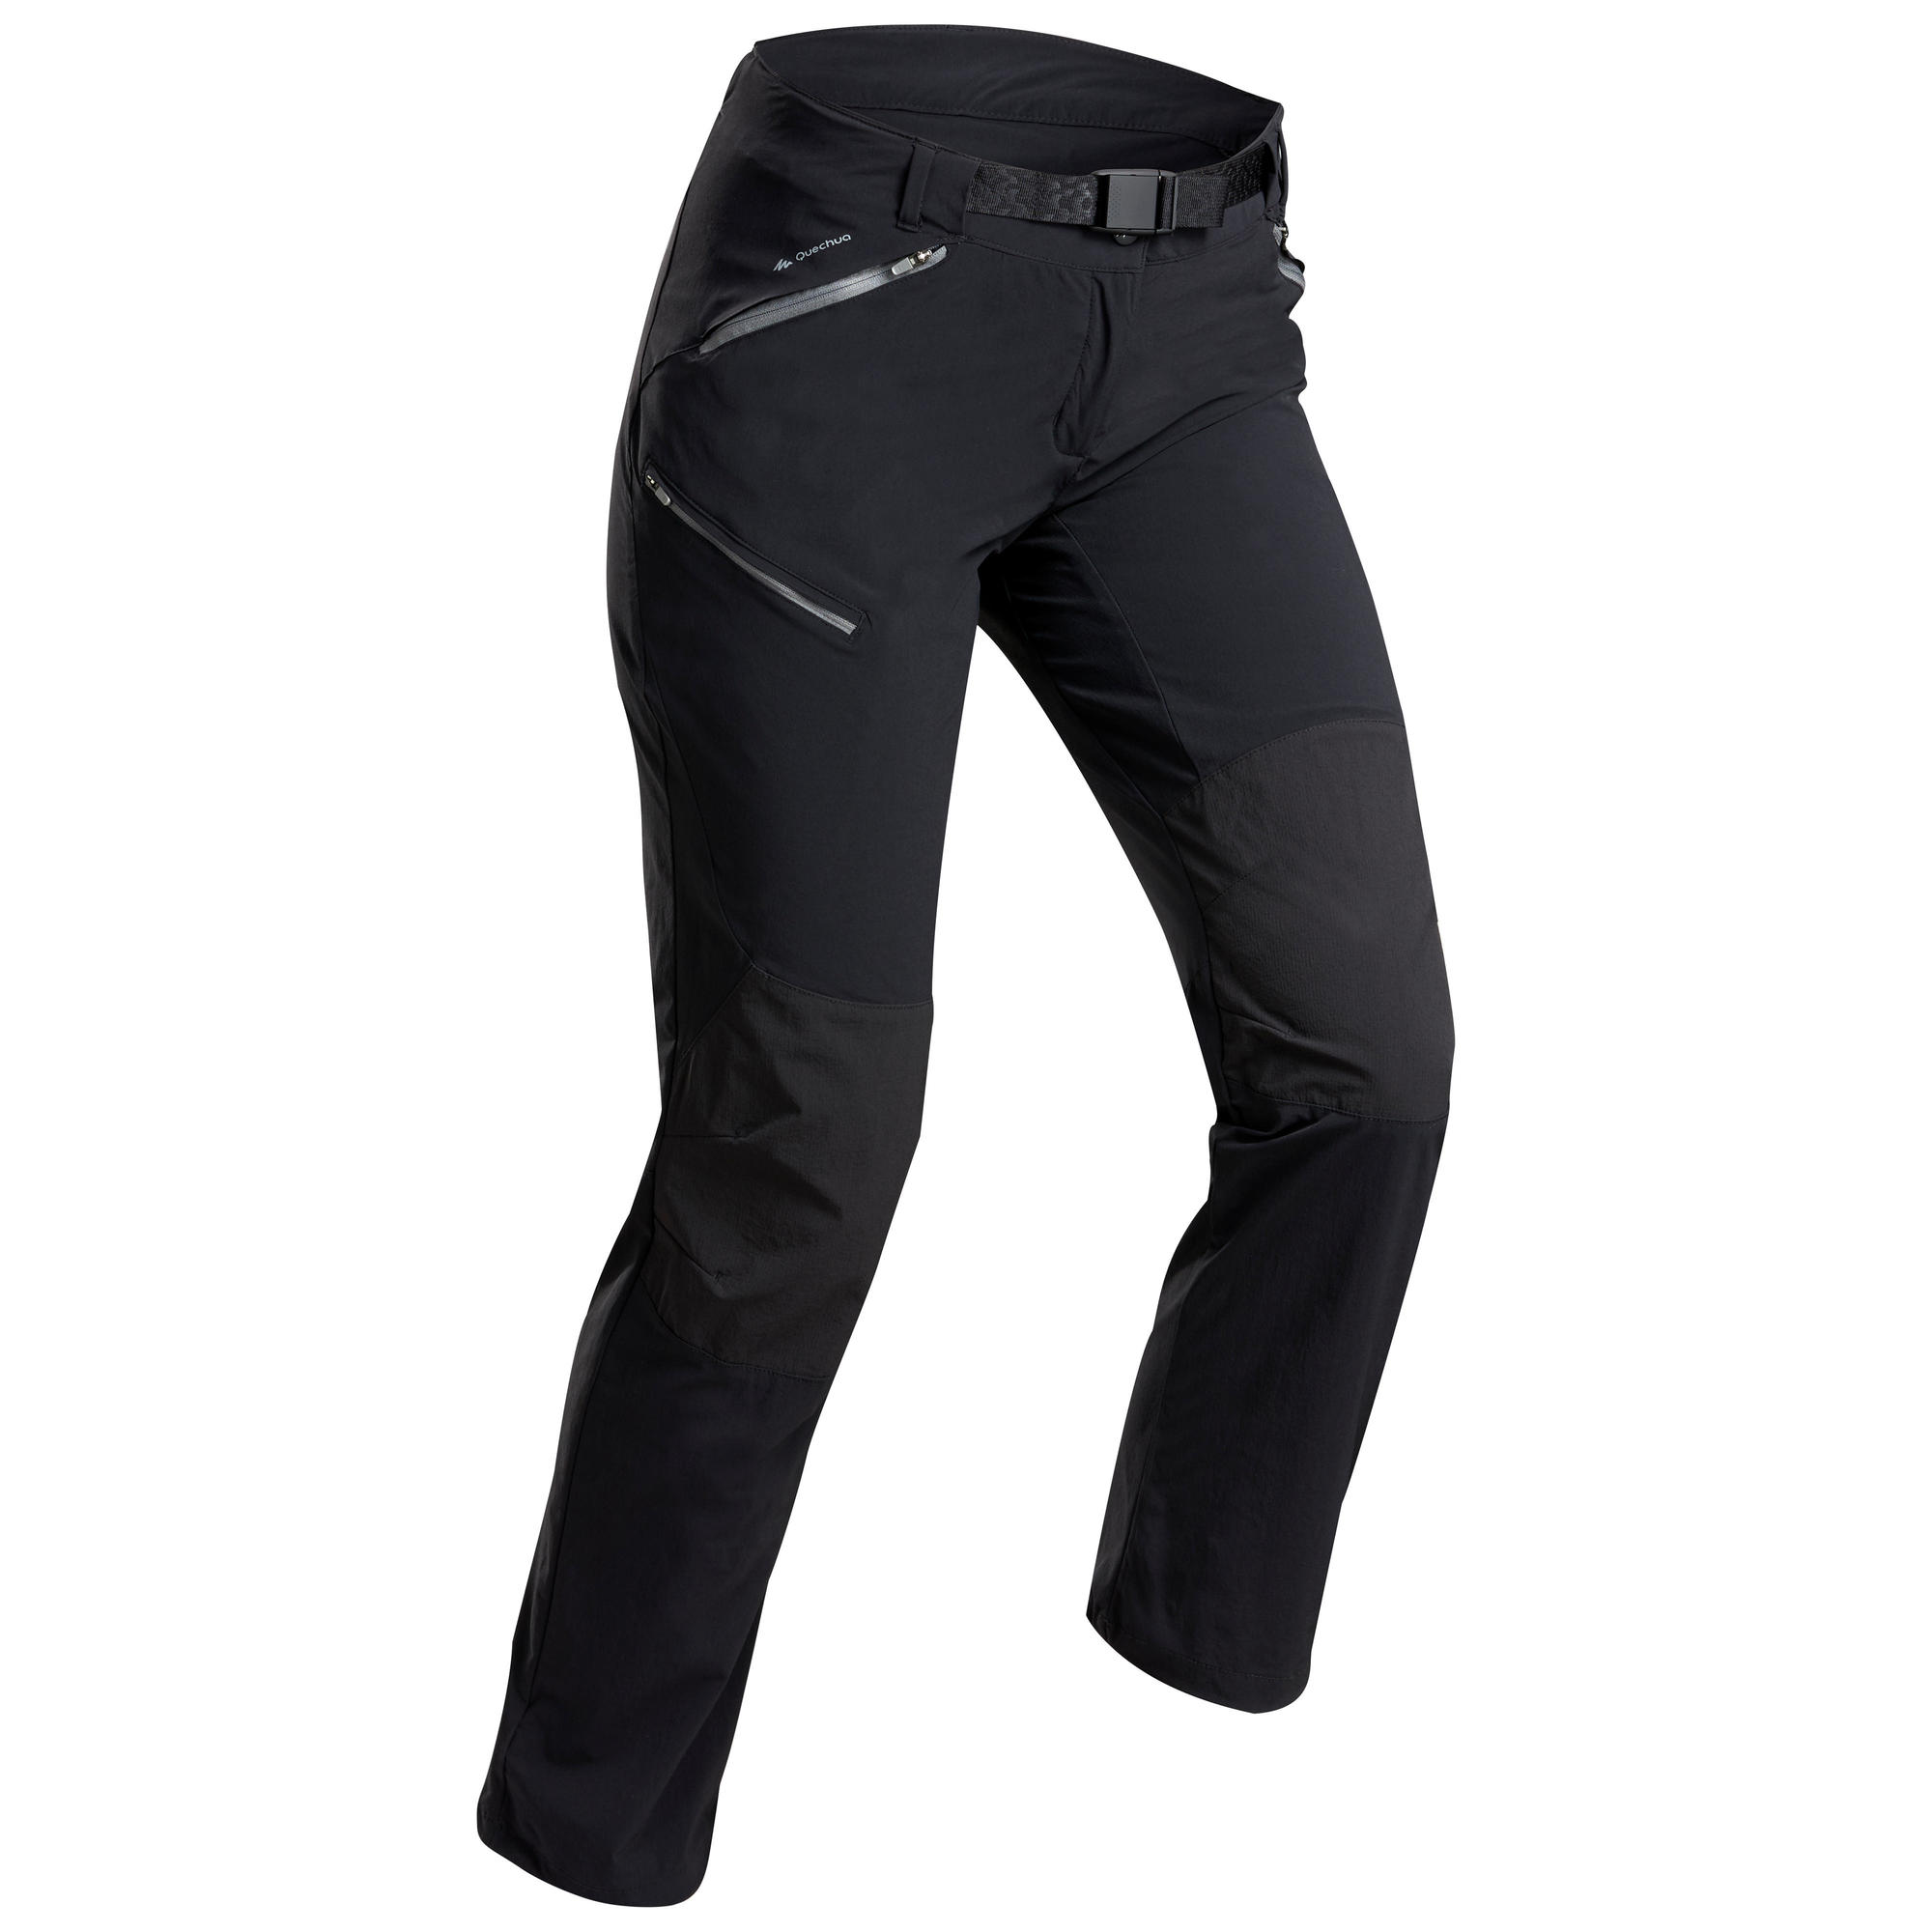 MH500, Hiking Pants, Women's - image 1 of 11